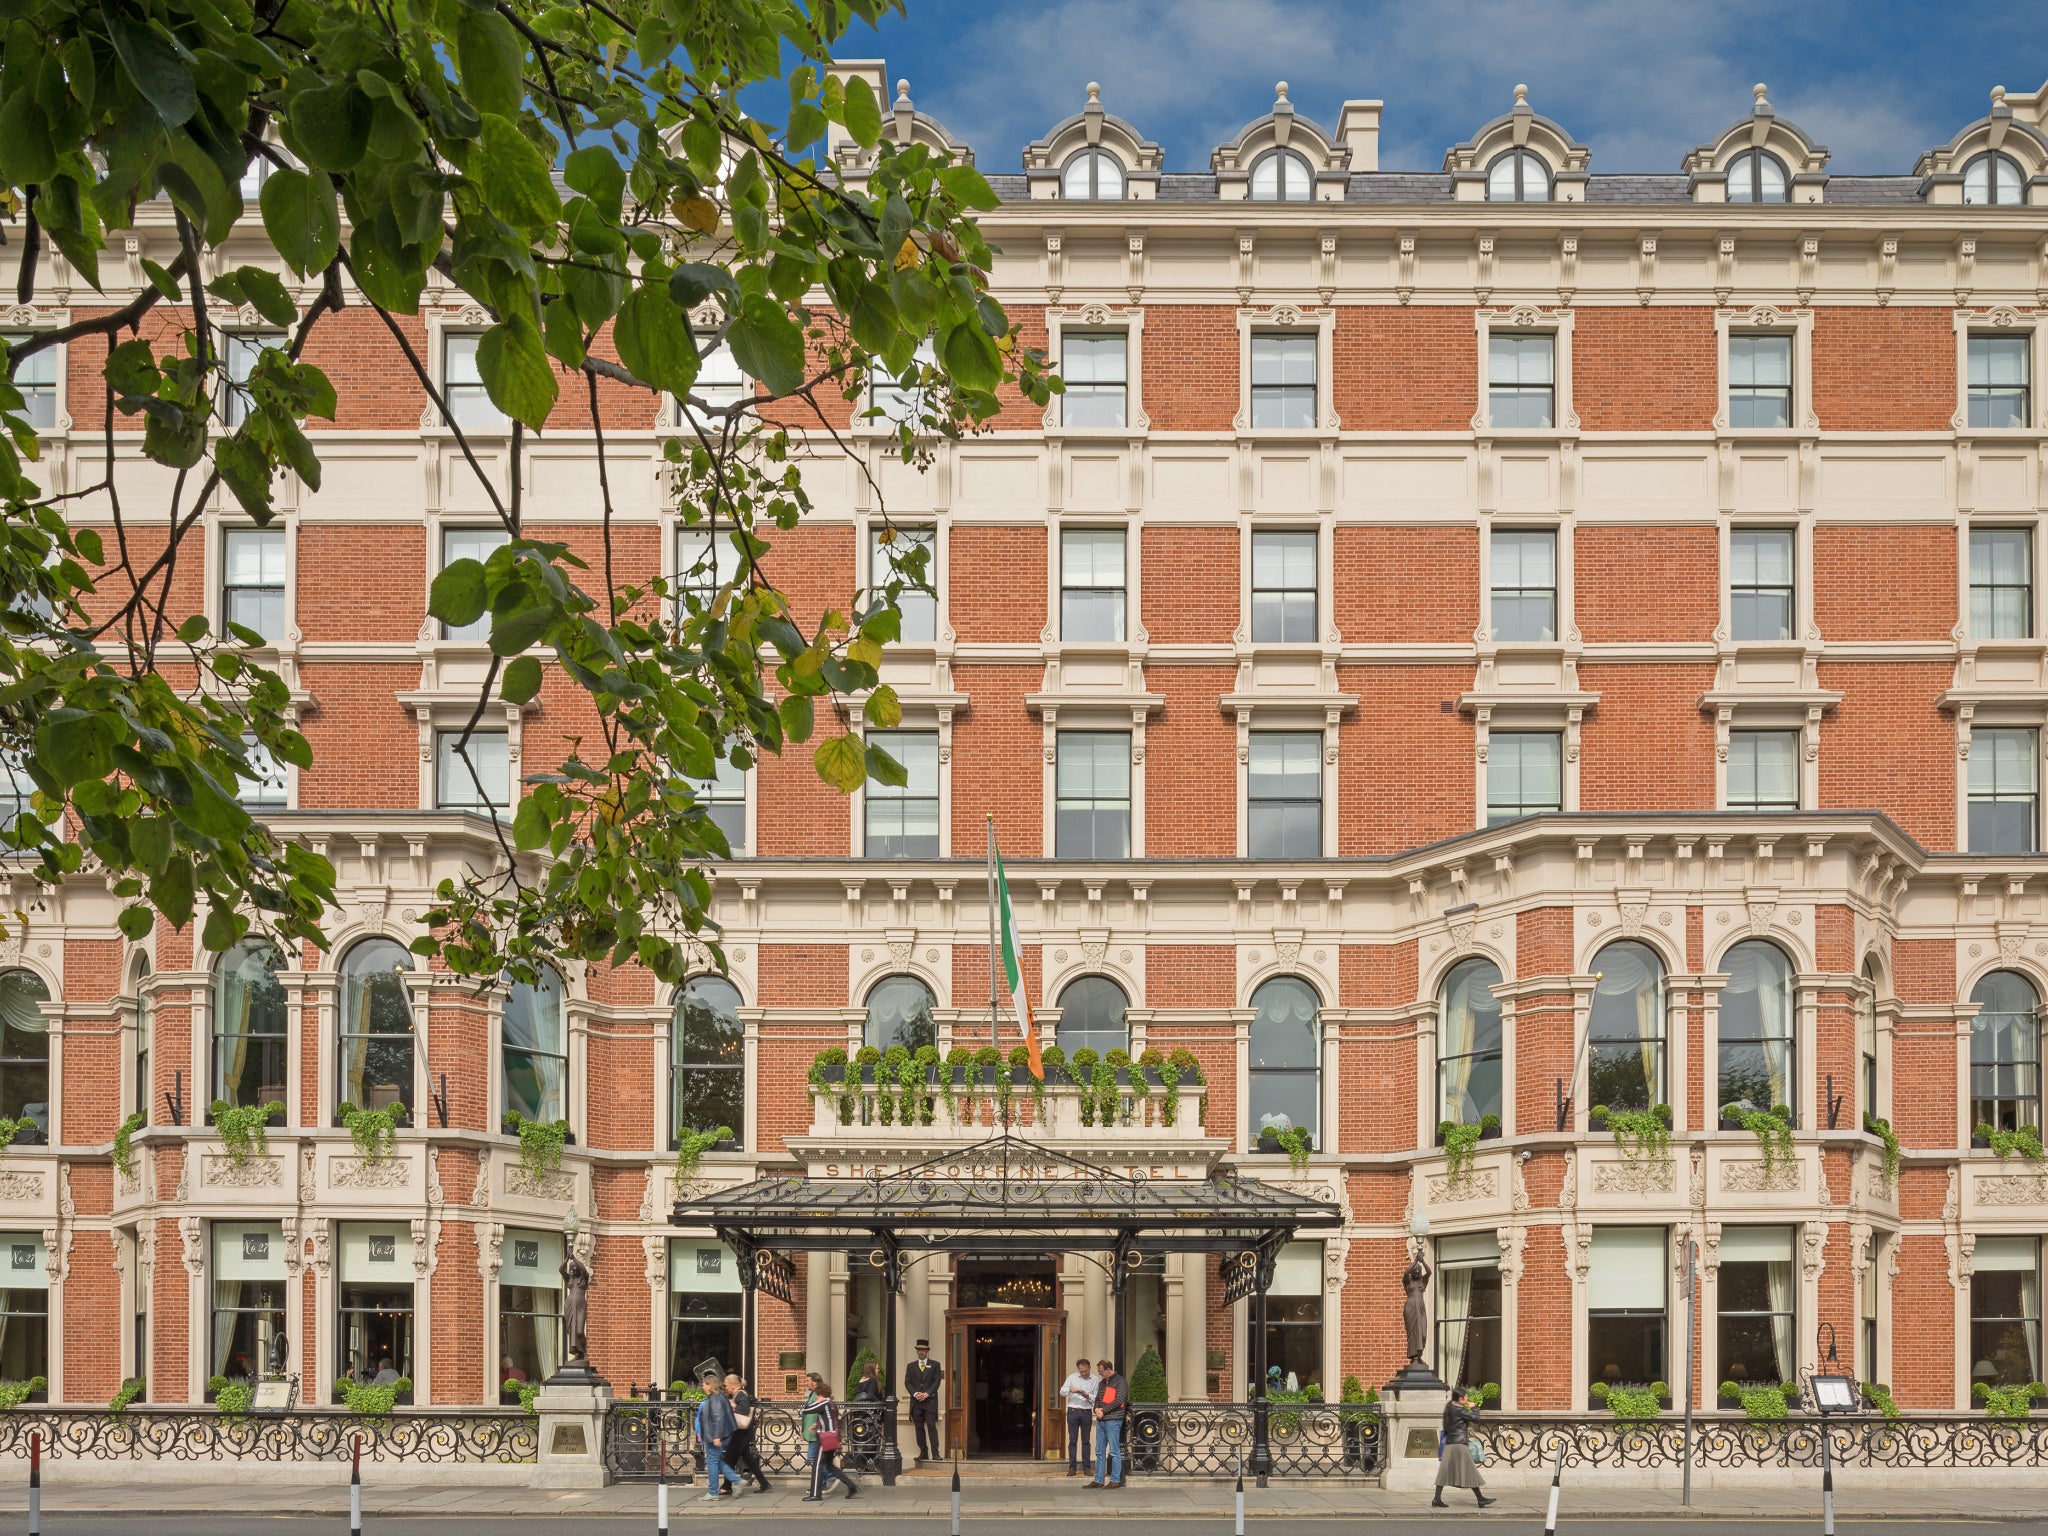 The brick building of The Shelbourne houses luxurious rooms and a cosy spa